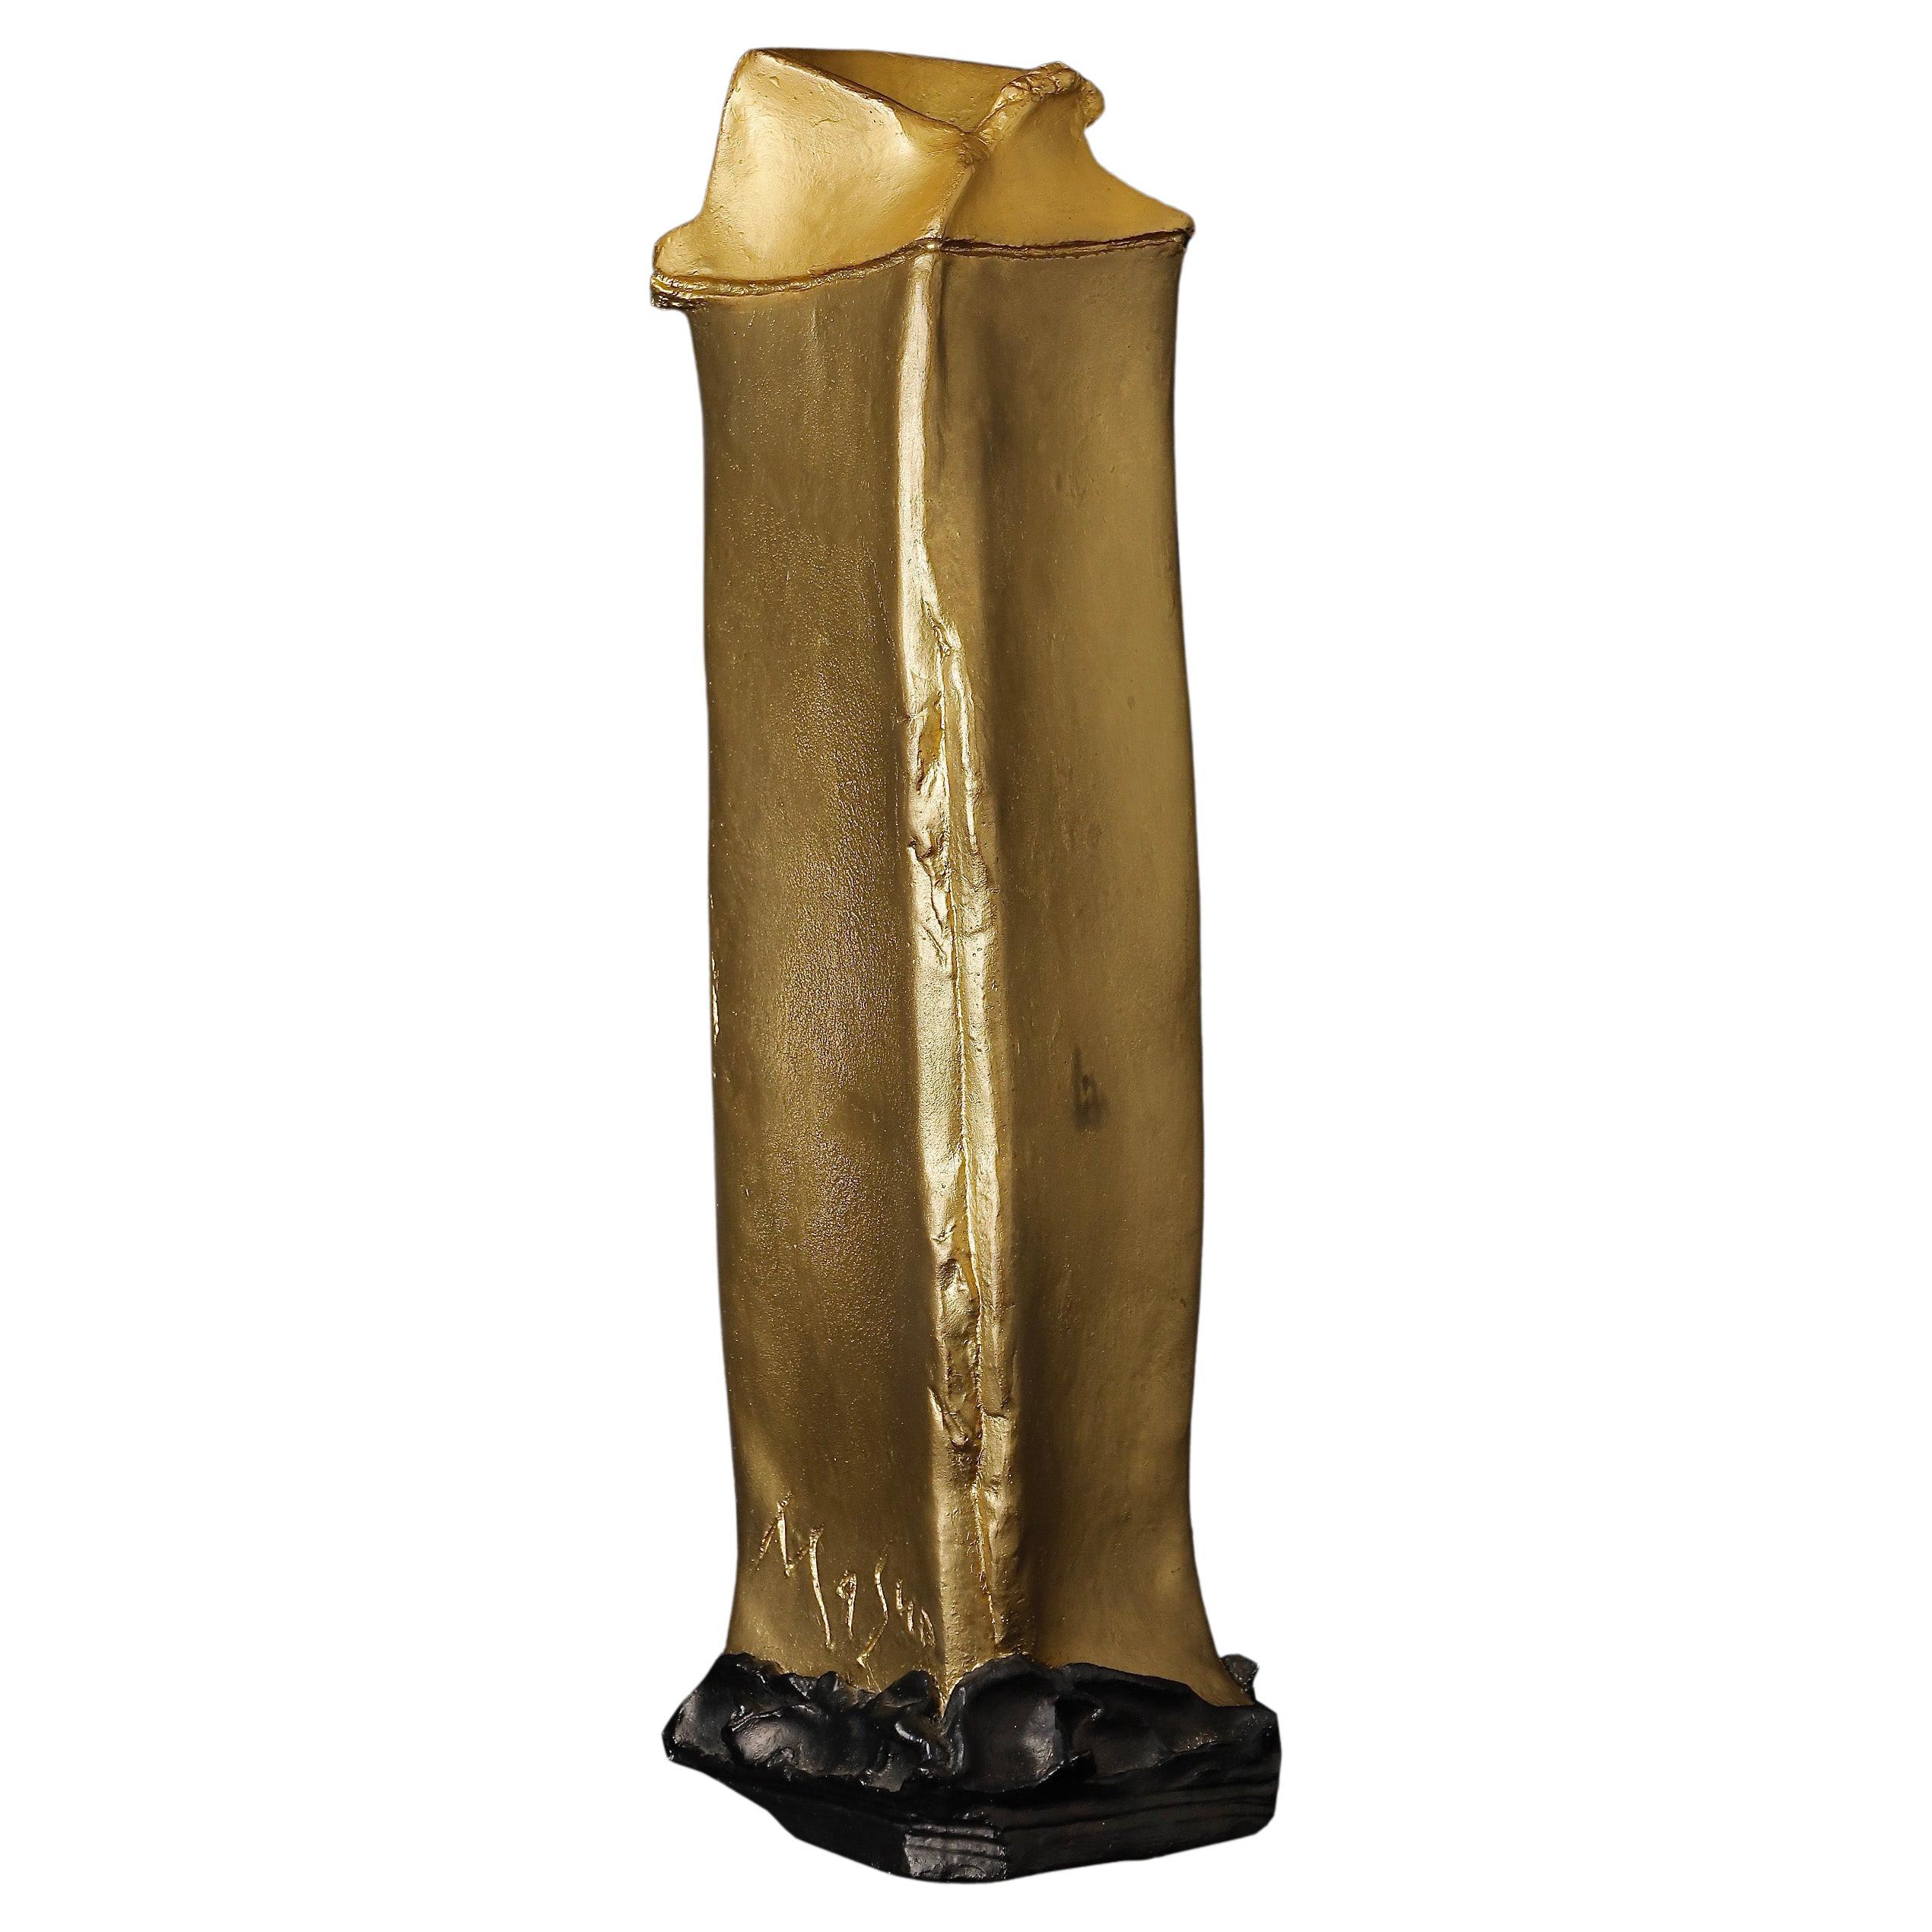 Spectacular Tall Bronze Vase by Ikeda Masuo One of the Top Metal Artists of 20 C